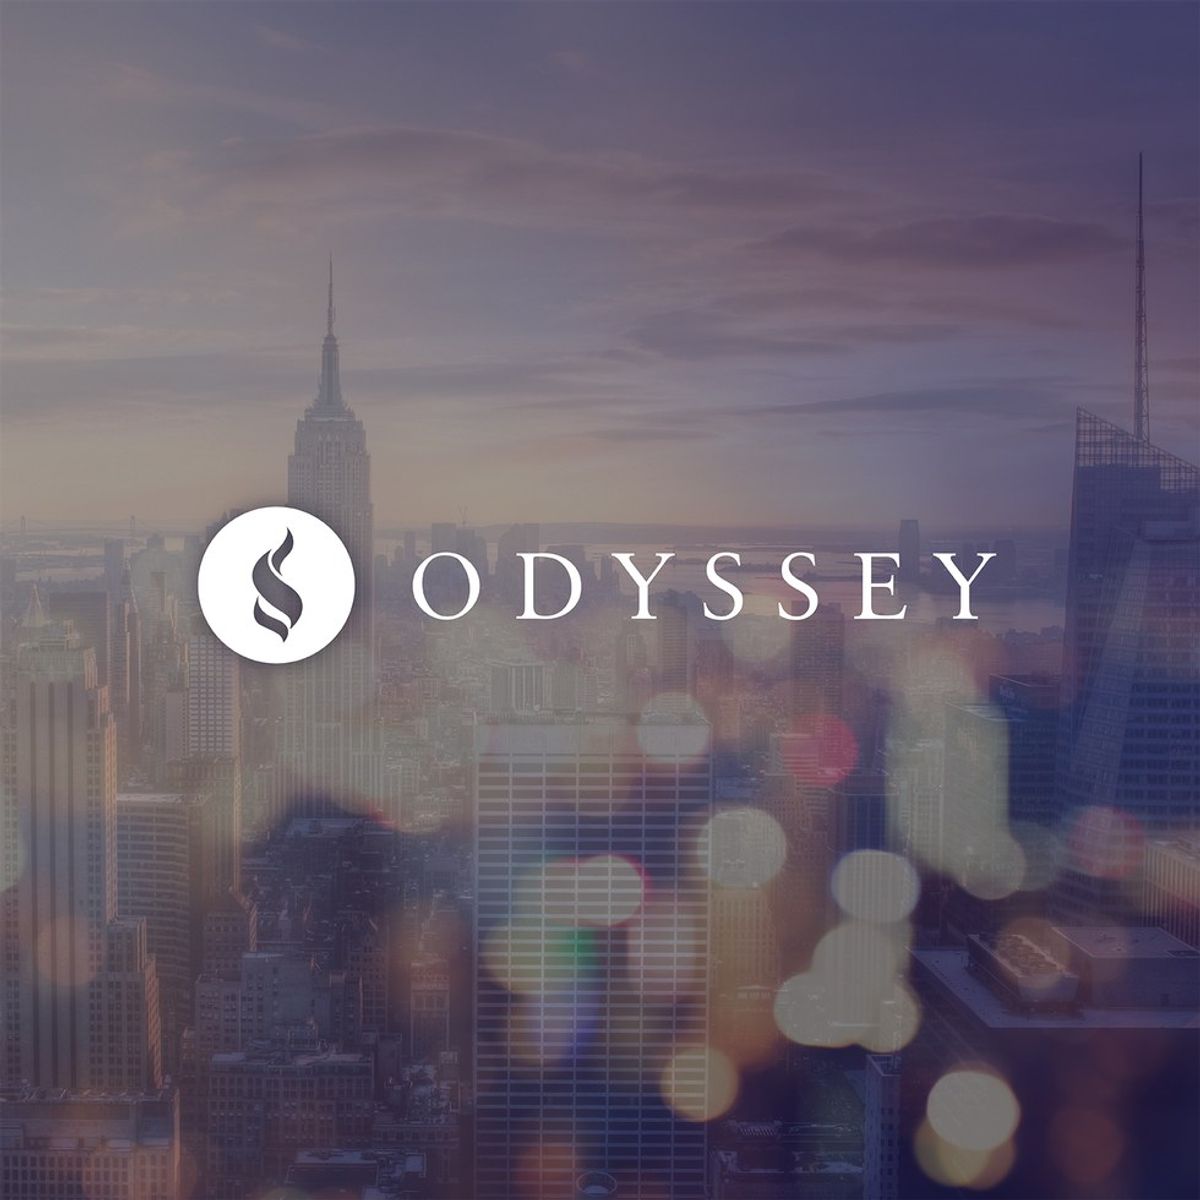 5 Things Being An EIC For Odyssey Has Taught Me